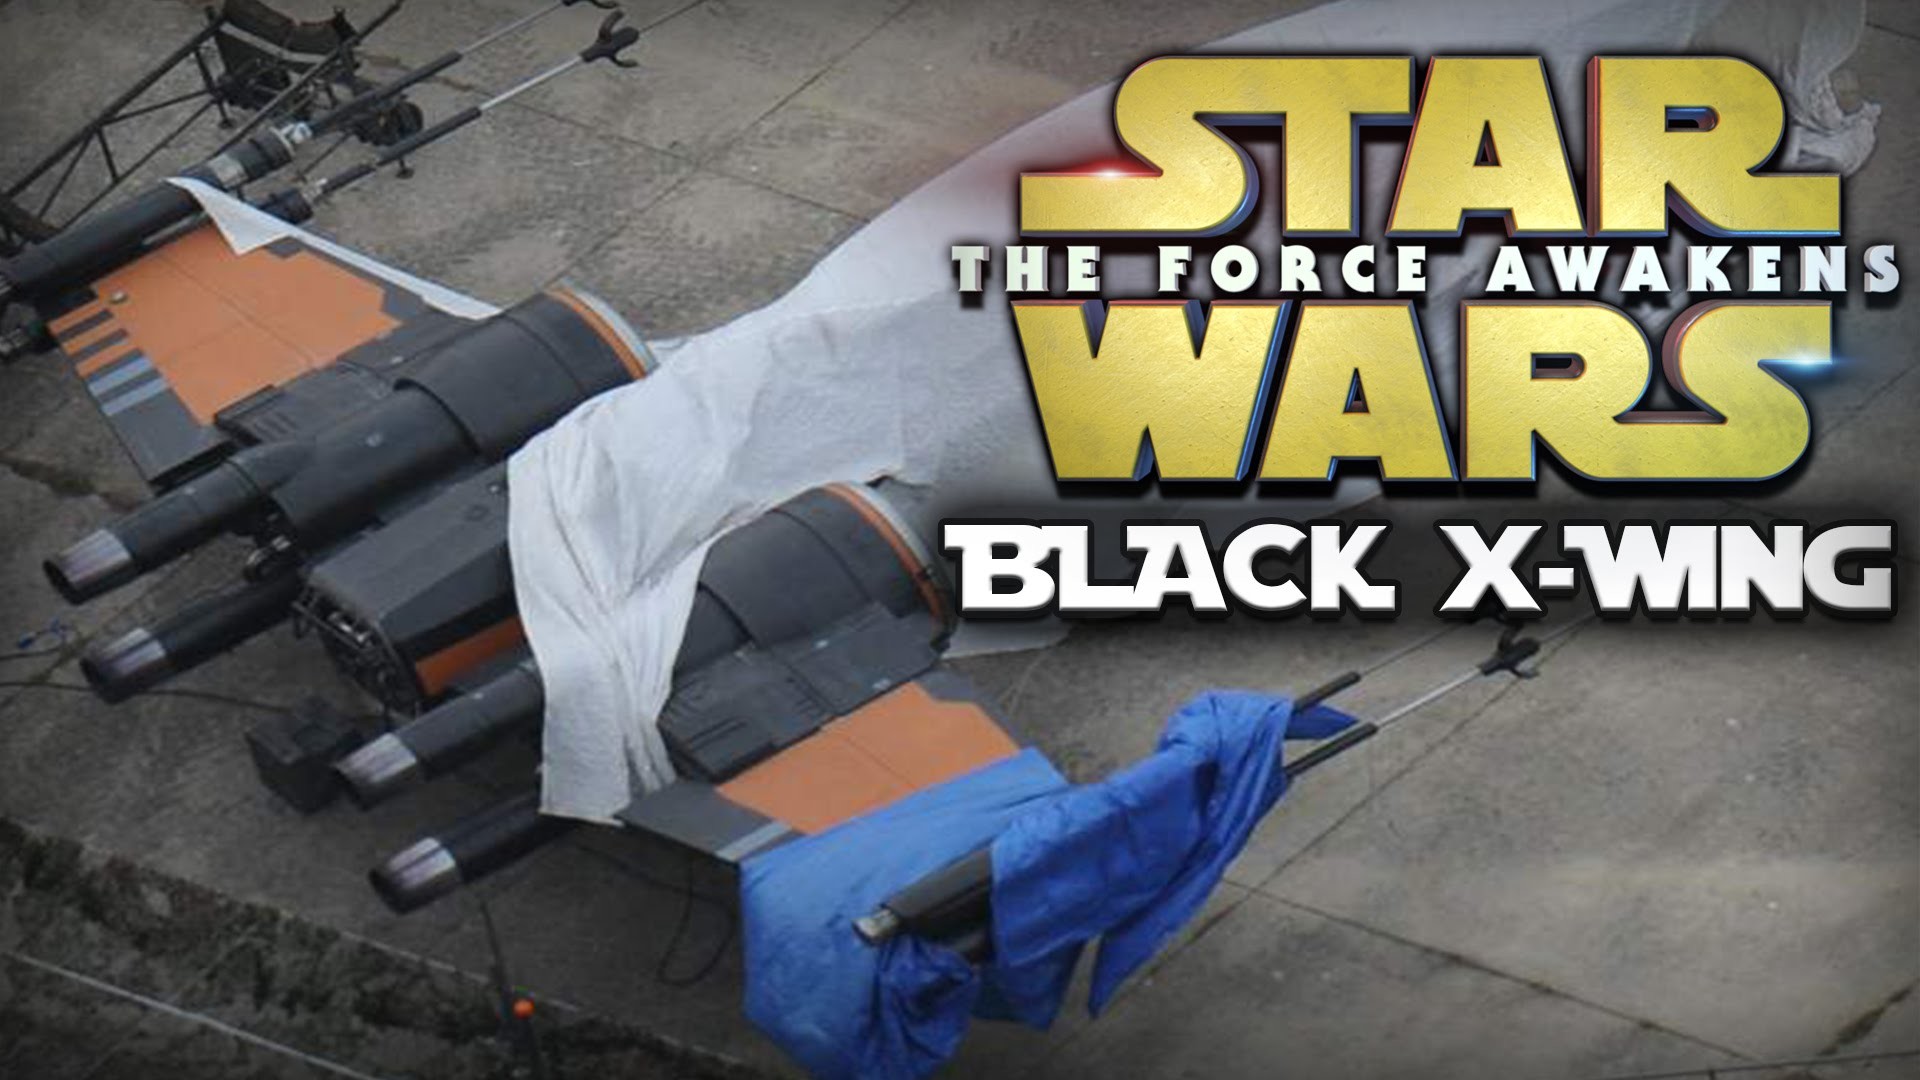 Star Wars The Force Awakens Leaks The Black X – Wing – Hidden Messages and Hasbro Toy Leaks – YouTube